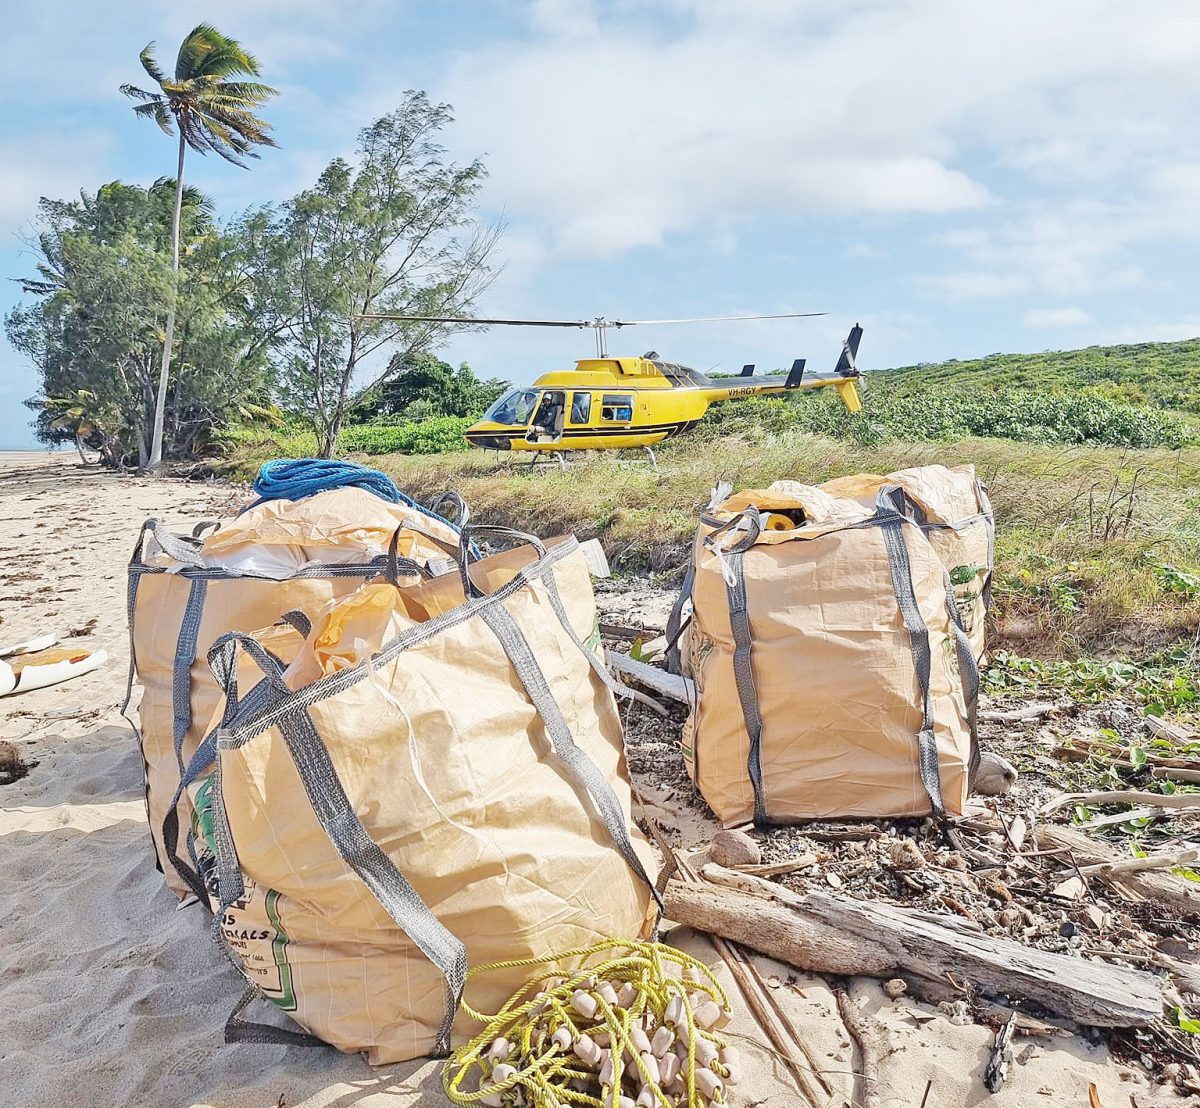 Ten tonnes of marine debris was removed by helicopter.